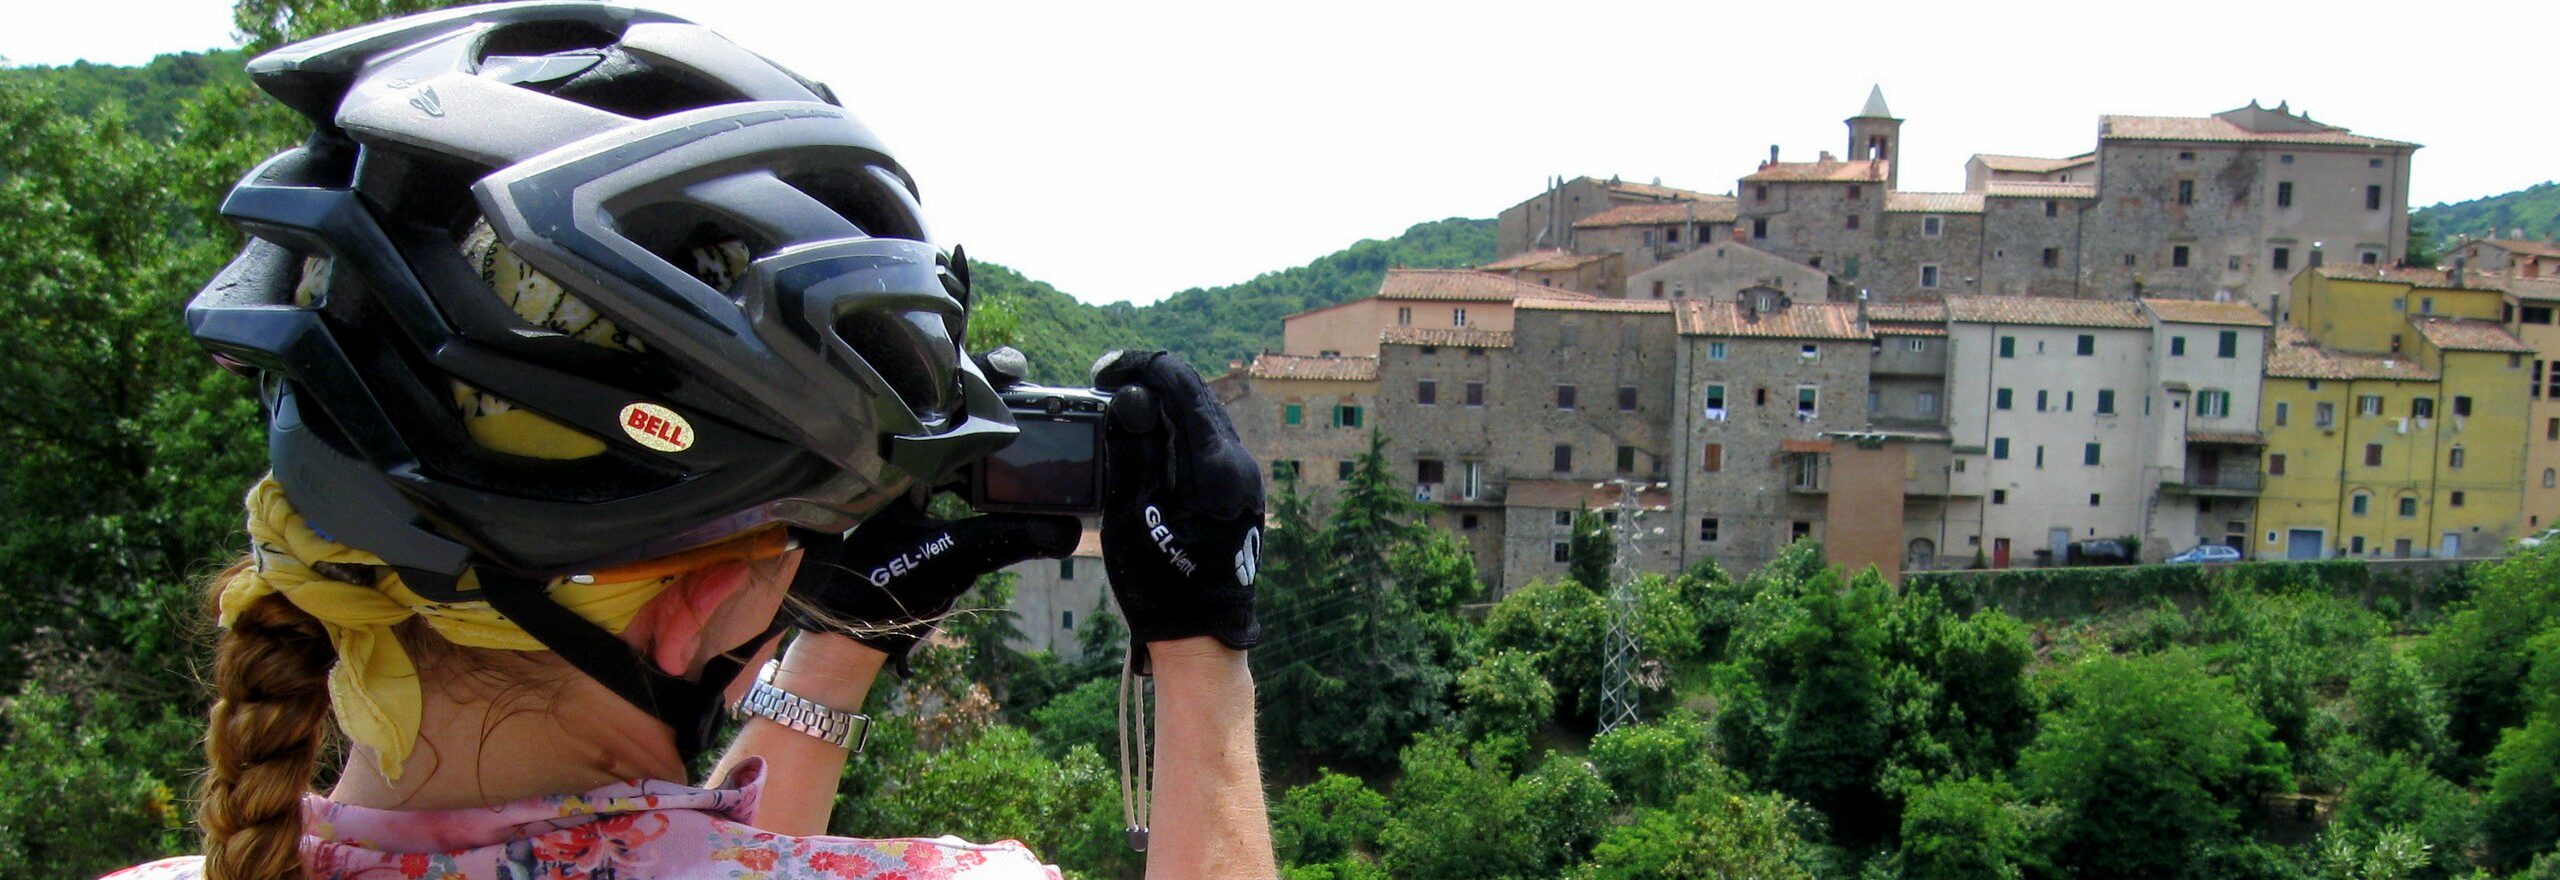 Stop and enjoy the view as you pedal to Venturina on this guided bike tour in Tuscany